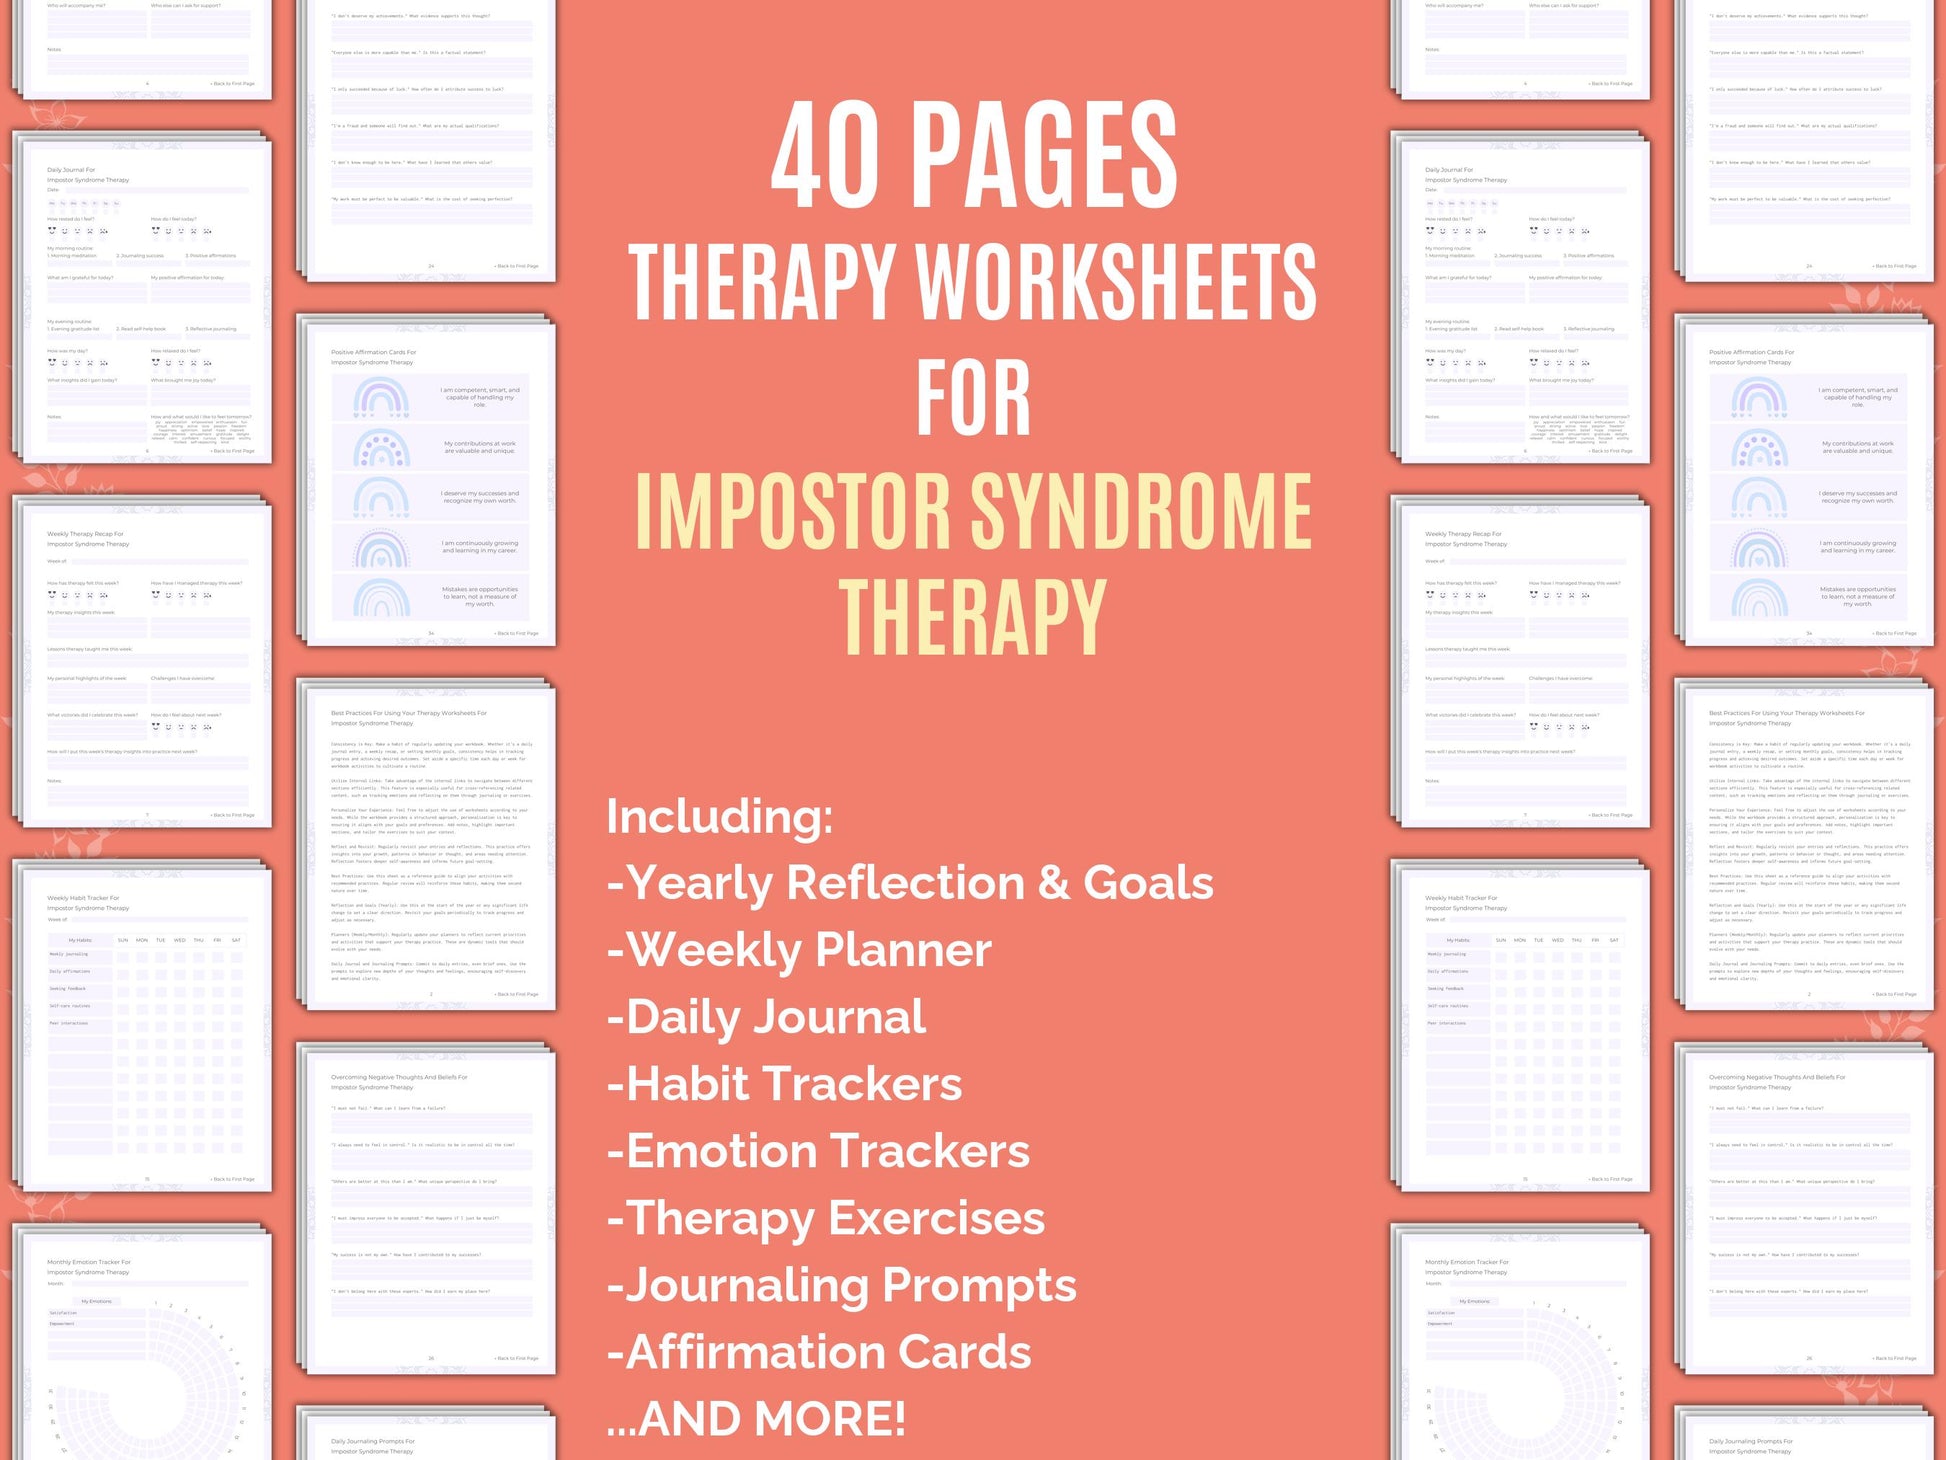 Therapy, Journaling, Workbooks, Journals, Templates, Goal Setting, Resources, Notes, Counseling, Tools, Planners, Impostor Syndrome Therapy, Cheat Sheet